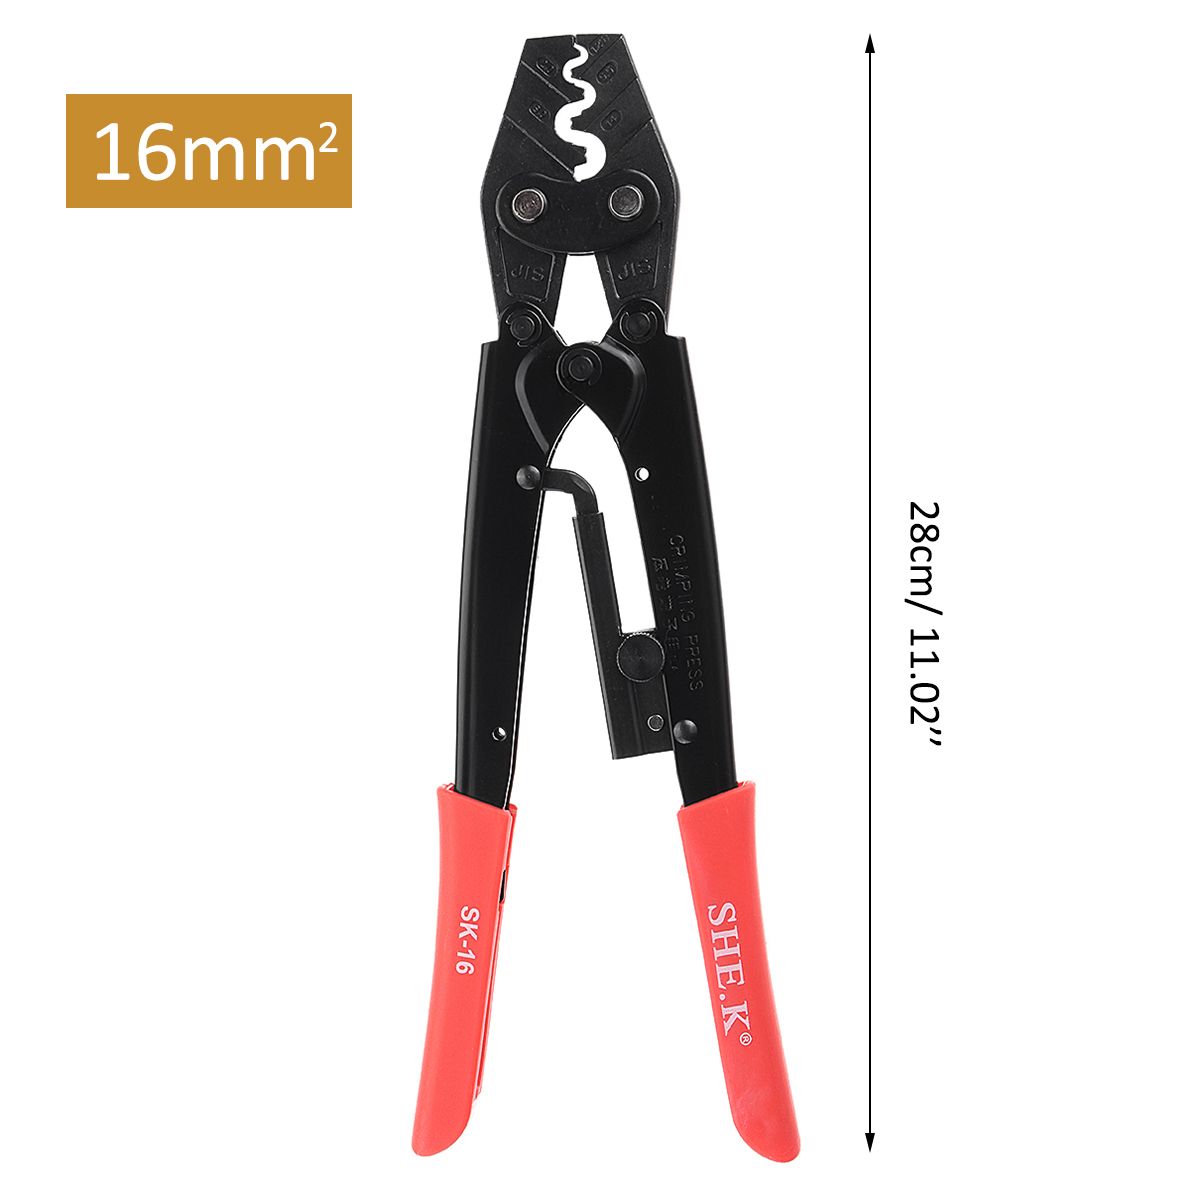 05-25mmsup2-Ratchet-Crimper-Cable-Wire-Cutter-Terminal-Crimping-Plier-4-Size-1351708